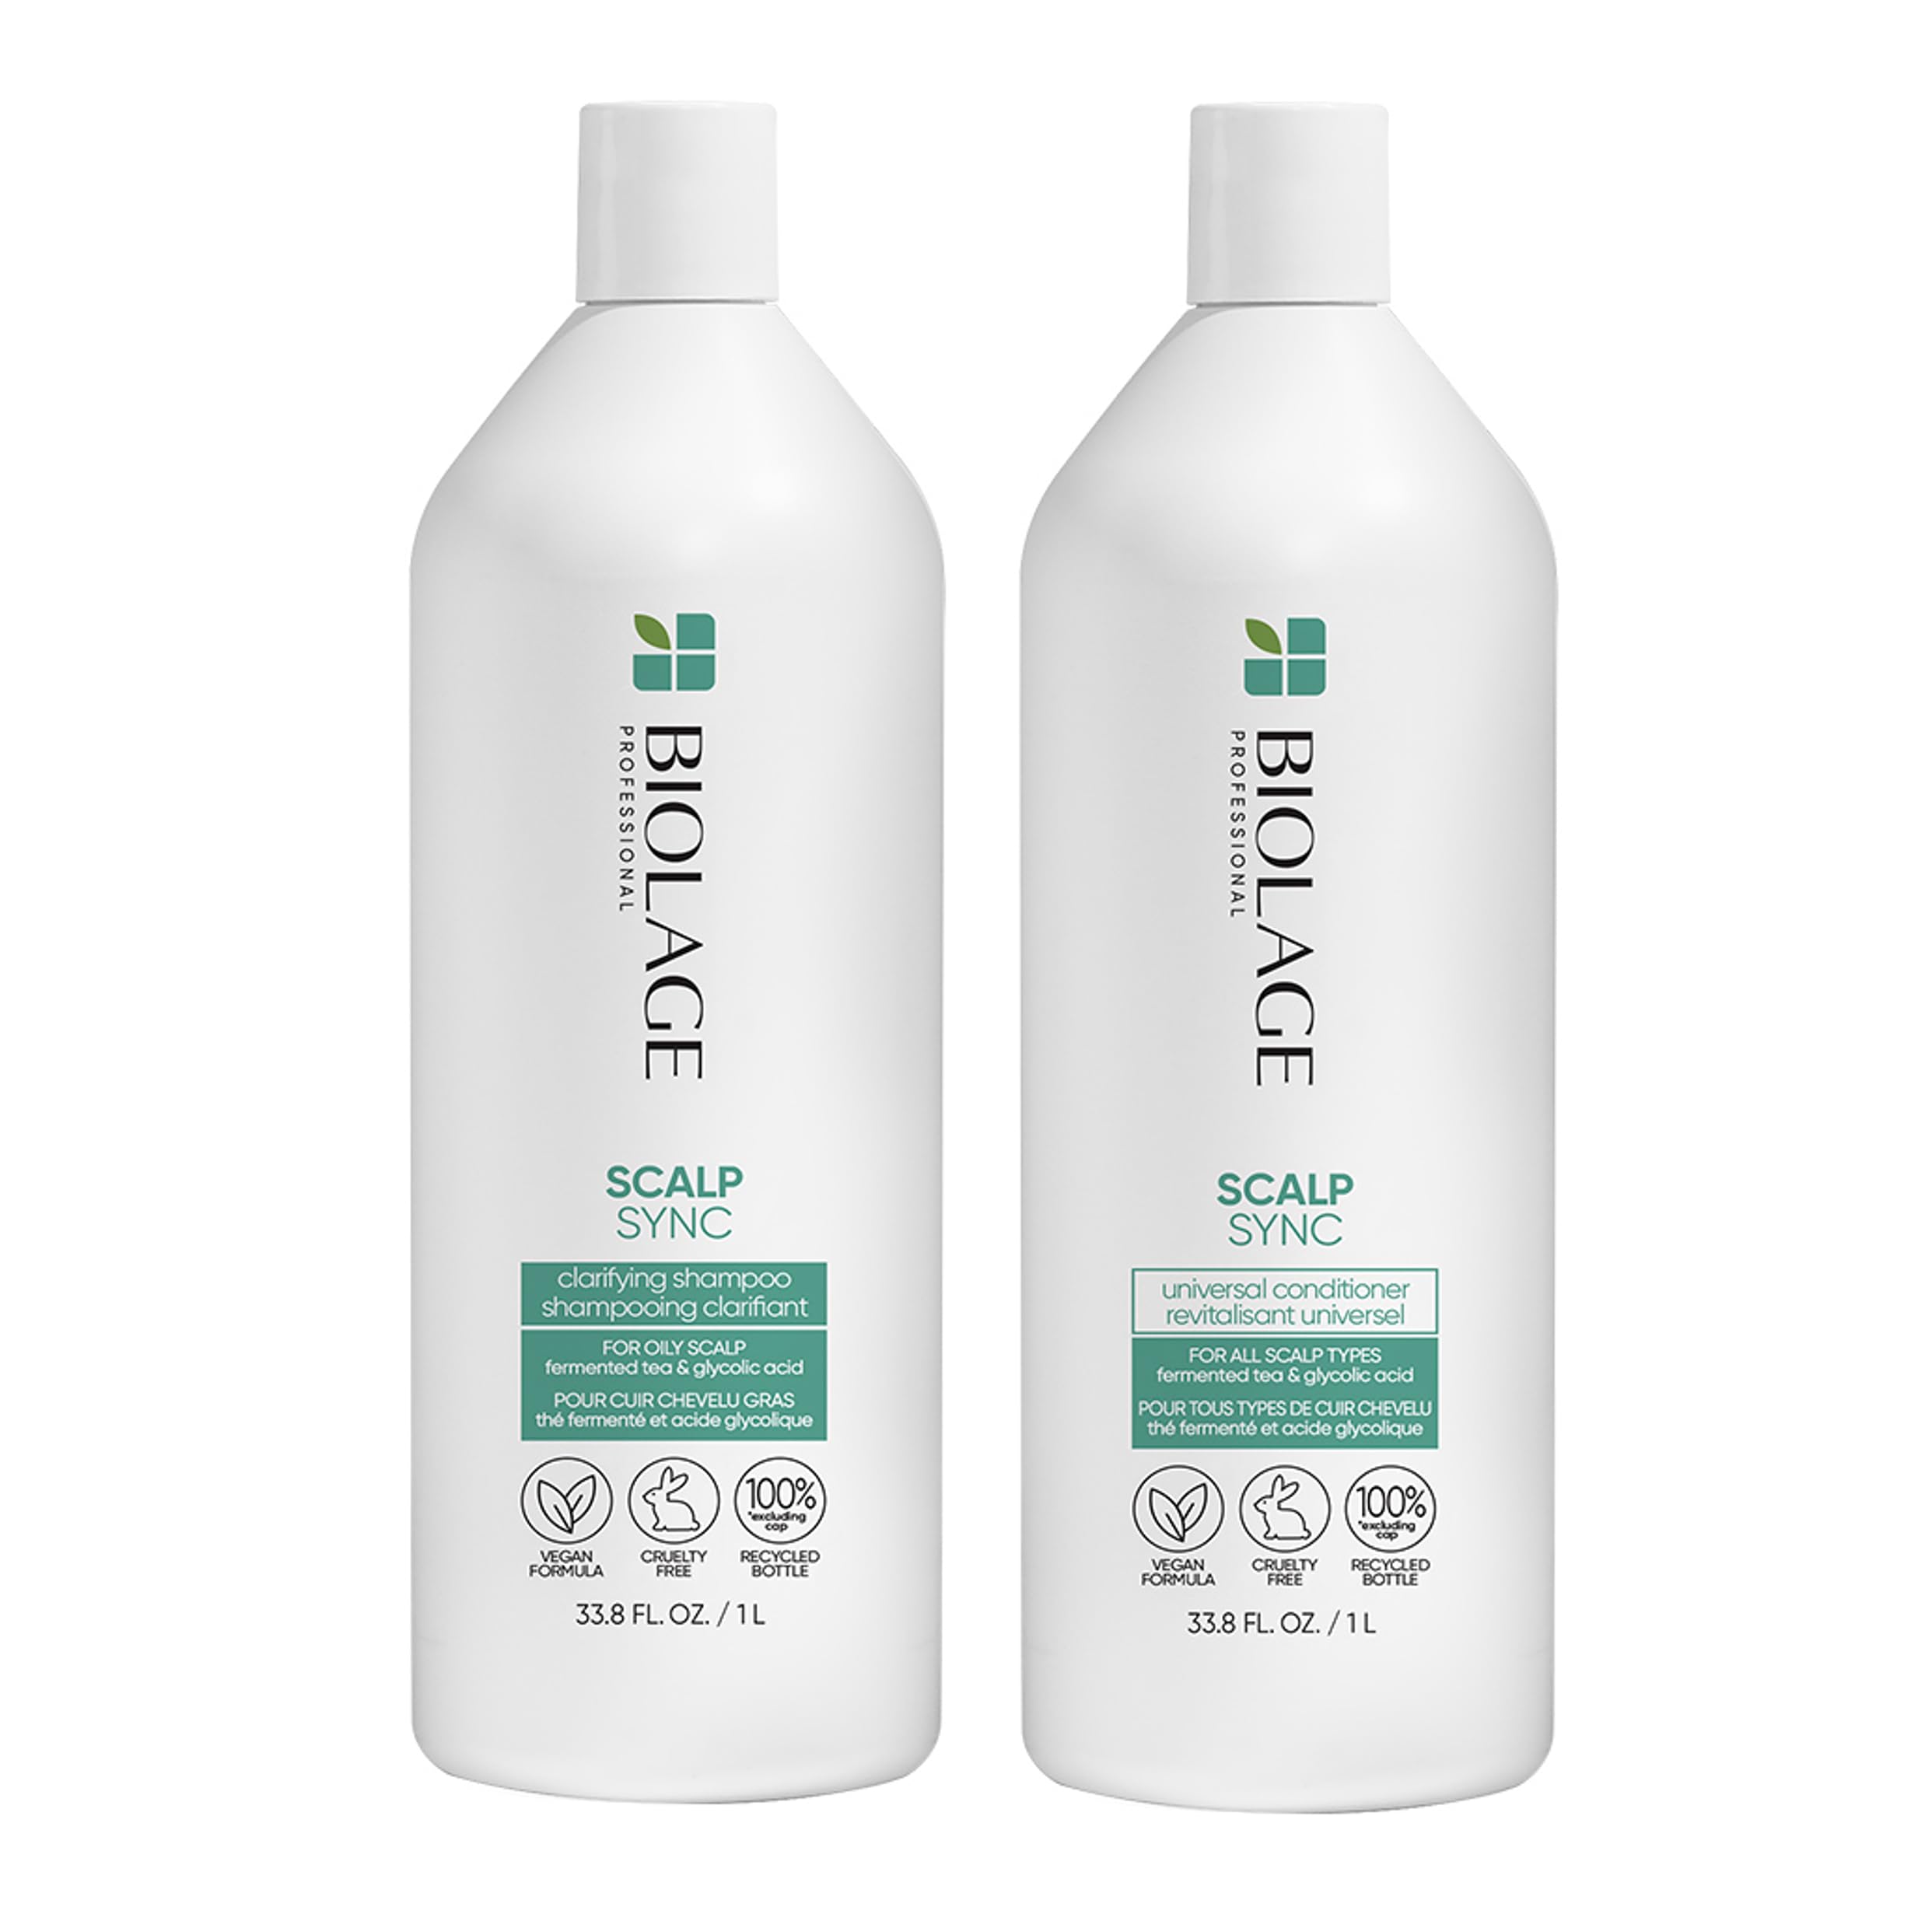 Biolage Scalp Sync Clarifying Shampoo & Universal Conditioner Set | Removes Residue, Buildup & Excess Oil | Paraben & Silicone Free | For Oily Hair & Scalp | Vegan